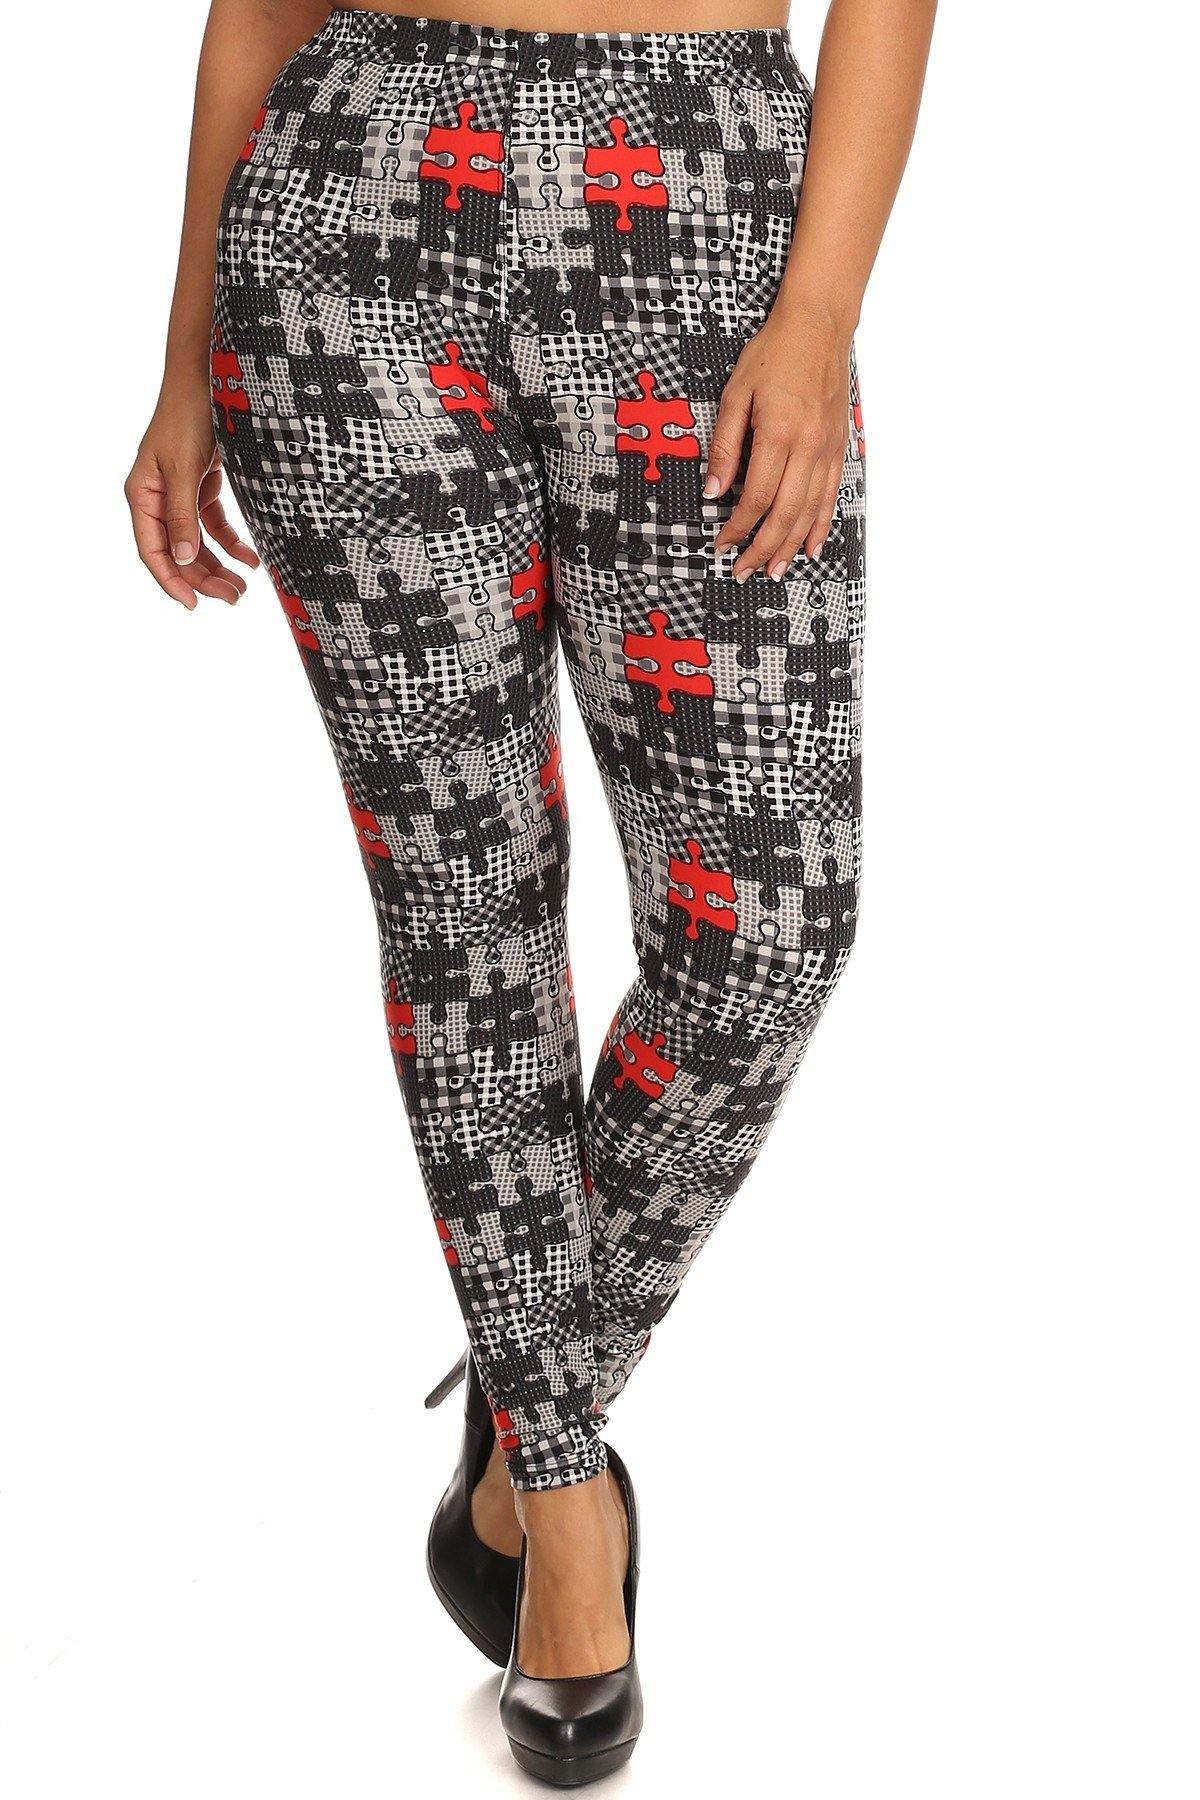 Plus Size Puzzle/plaid Print, Full Length Leggings In A Slim Fitting Style With A Banded High Waist - Pearlara